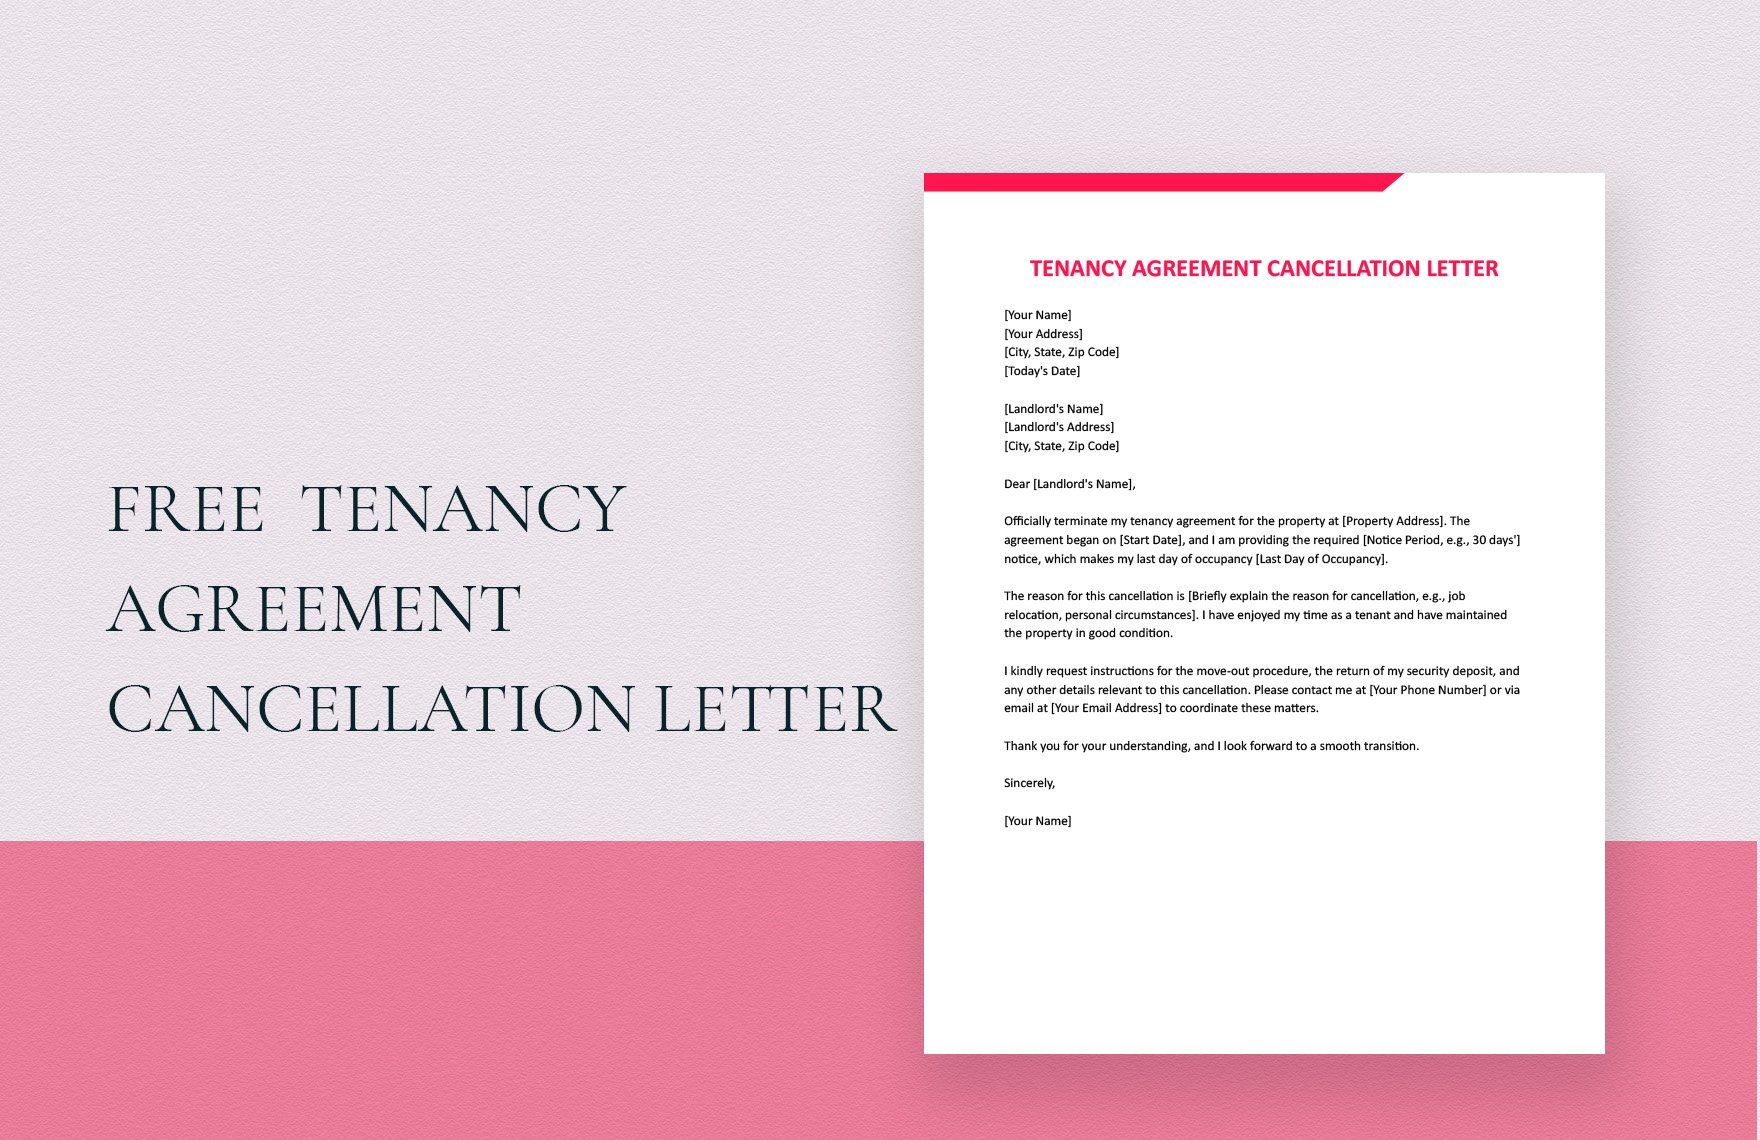 Tenancy Agreement Cancellation Letter